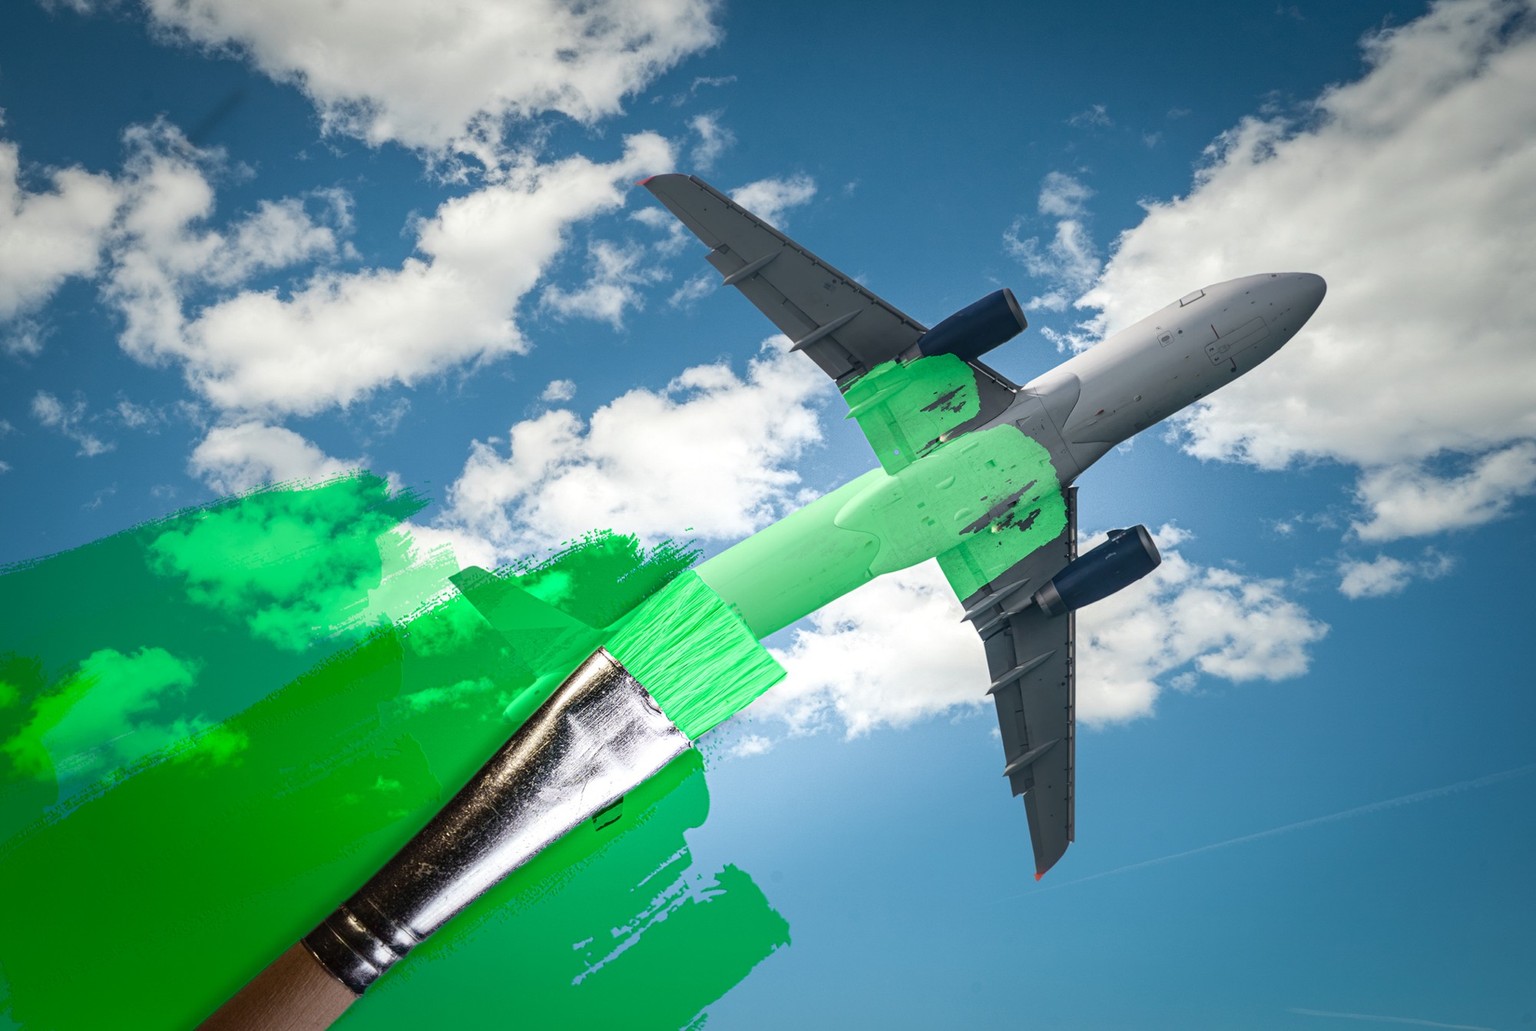 brush painting green an aircraft. Greenwashing malpractice, Zero emissions, SAF or Sustainable Aviation Fuel, Circular economy, net CO2 emissions or biofuel concepts.